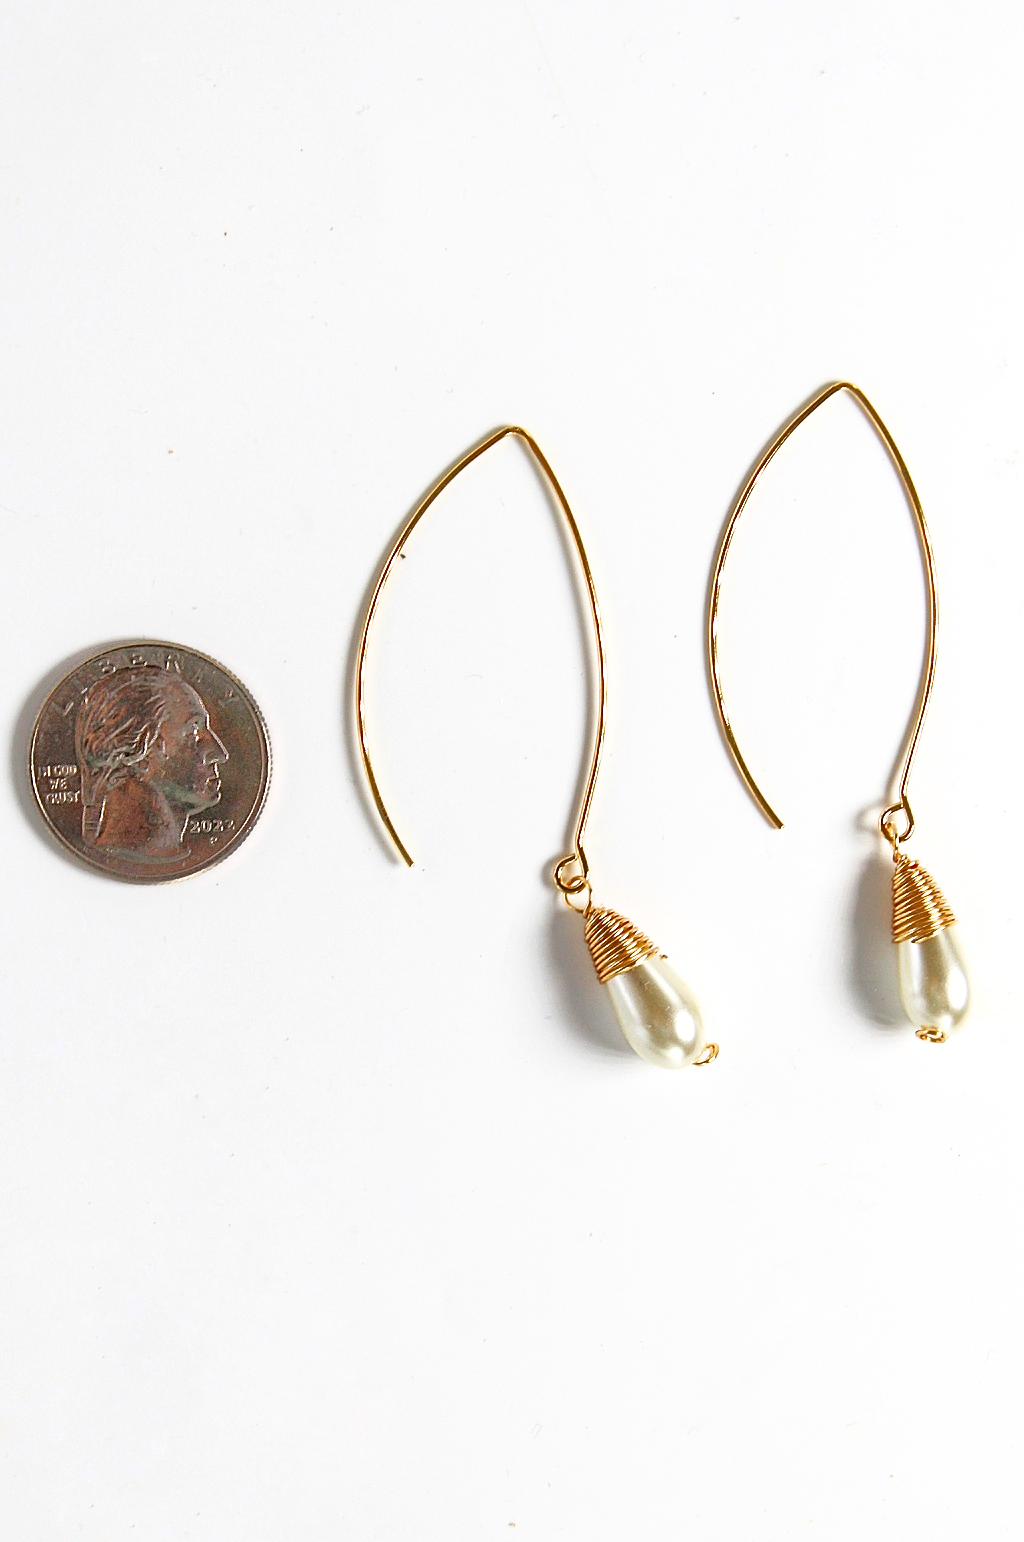 The Dunn Earrings by Annie Claire Designs - SoSis